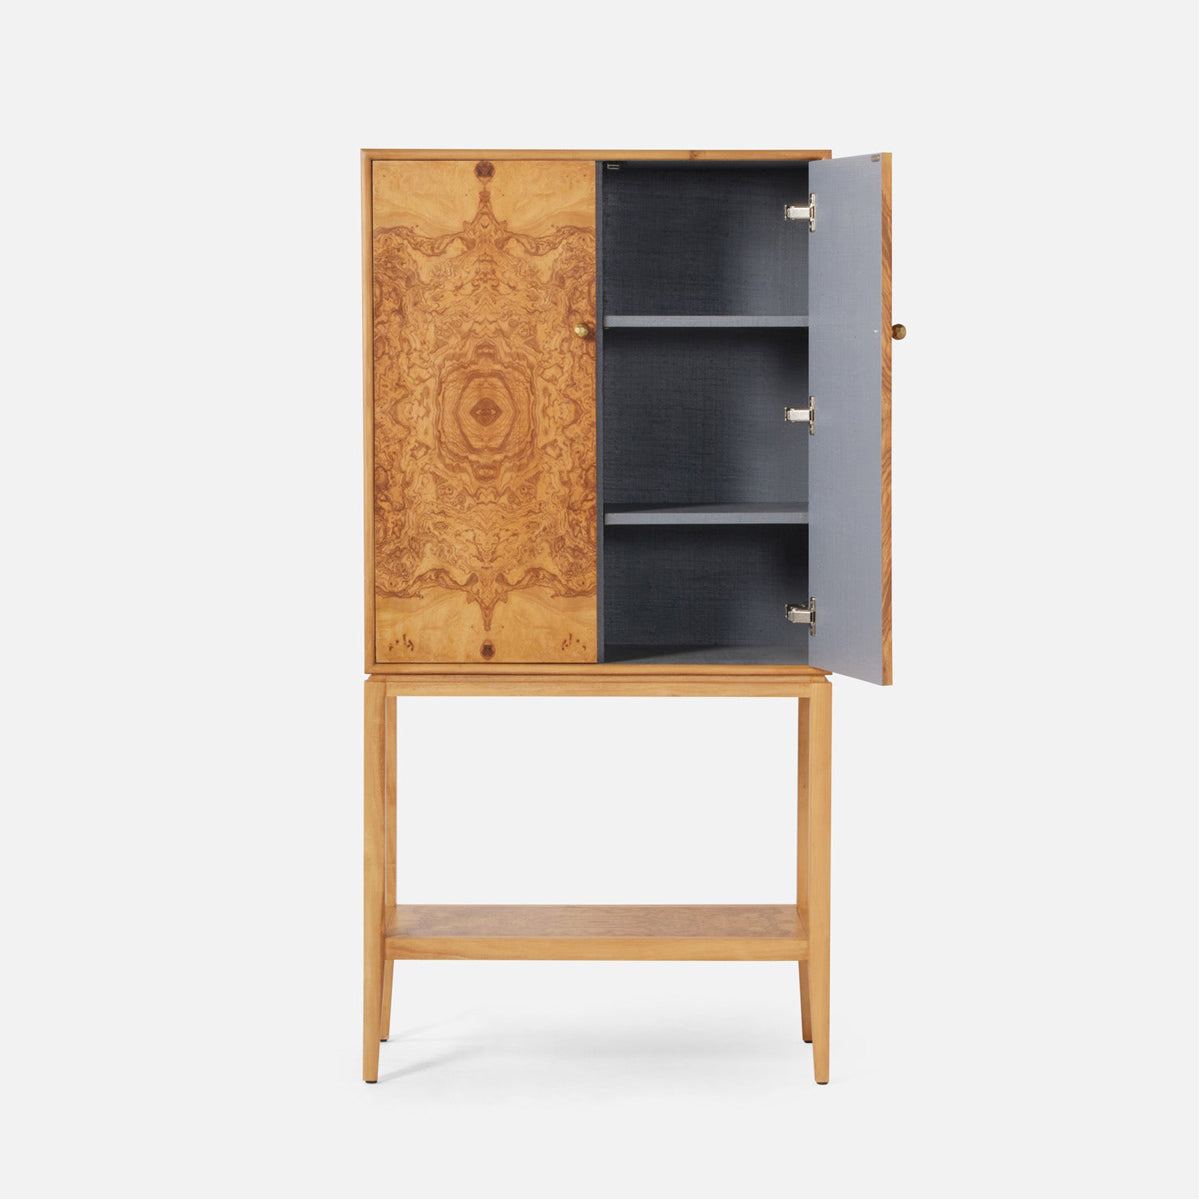 Made Goods Taina Olive Ash Veneer Standing Cabinet